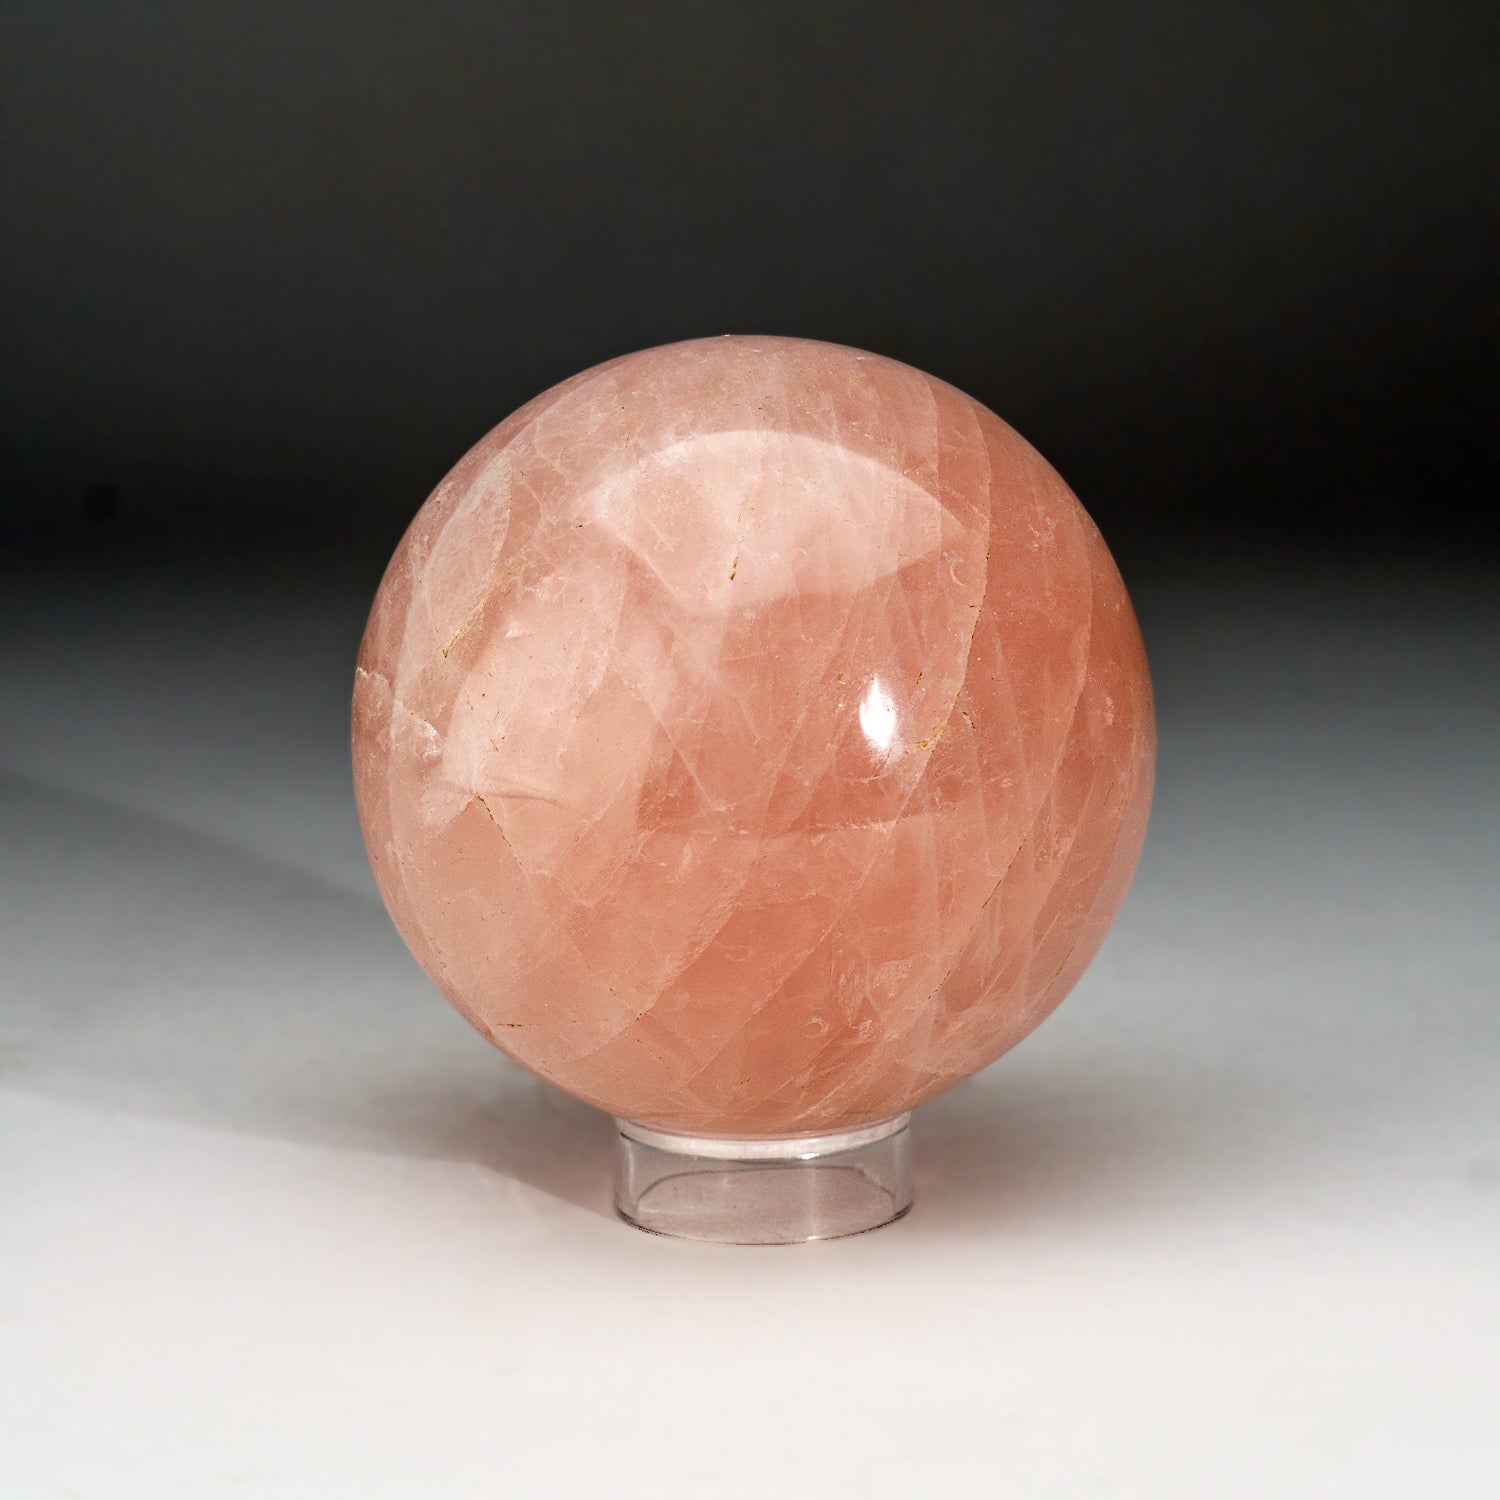 Polished Rose Quartz Sphere from Madagascar (1.7 lbs)